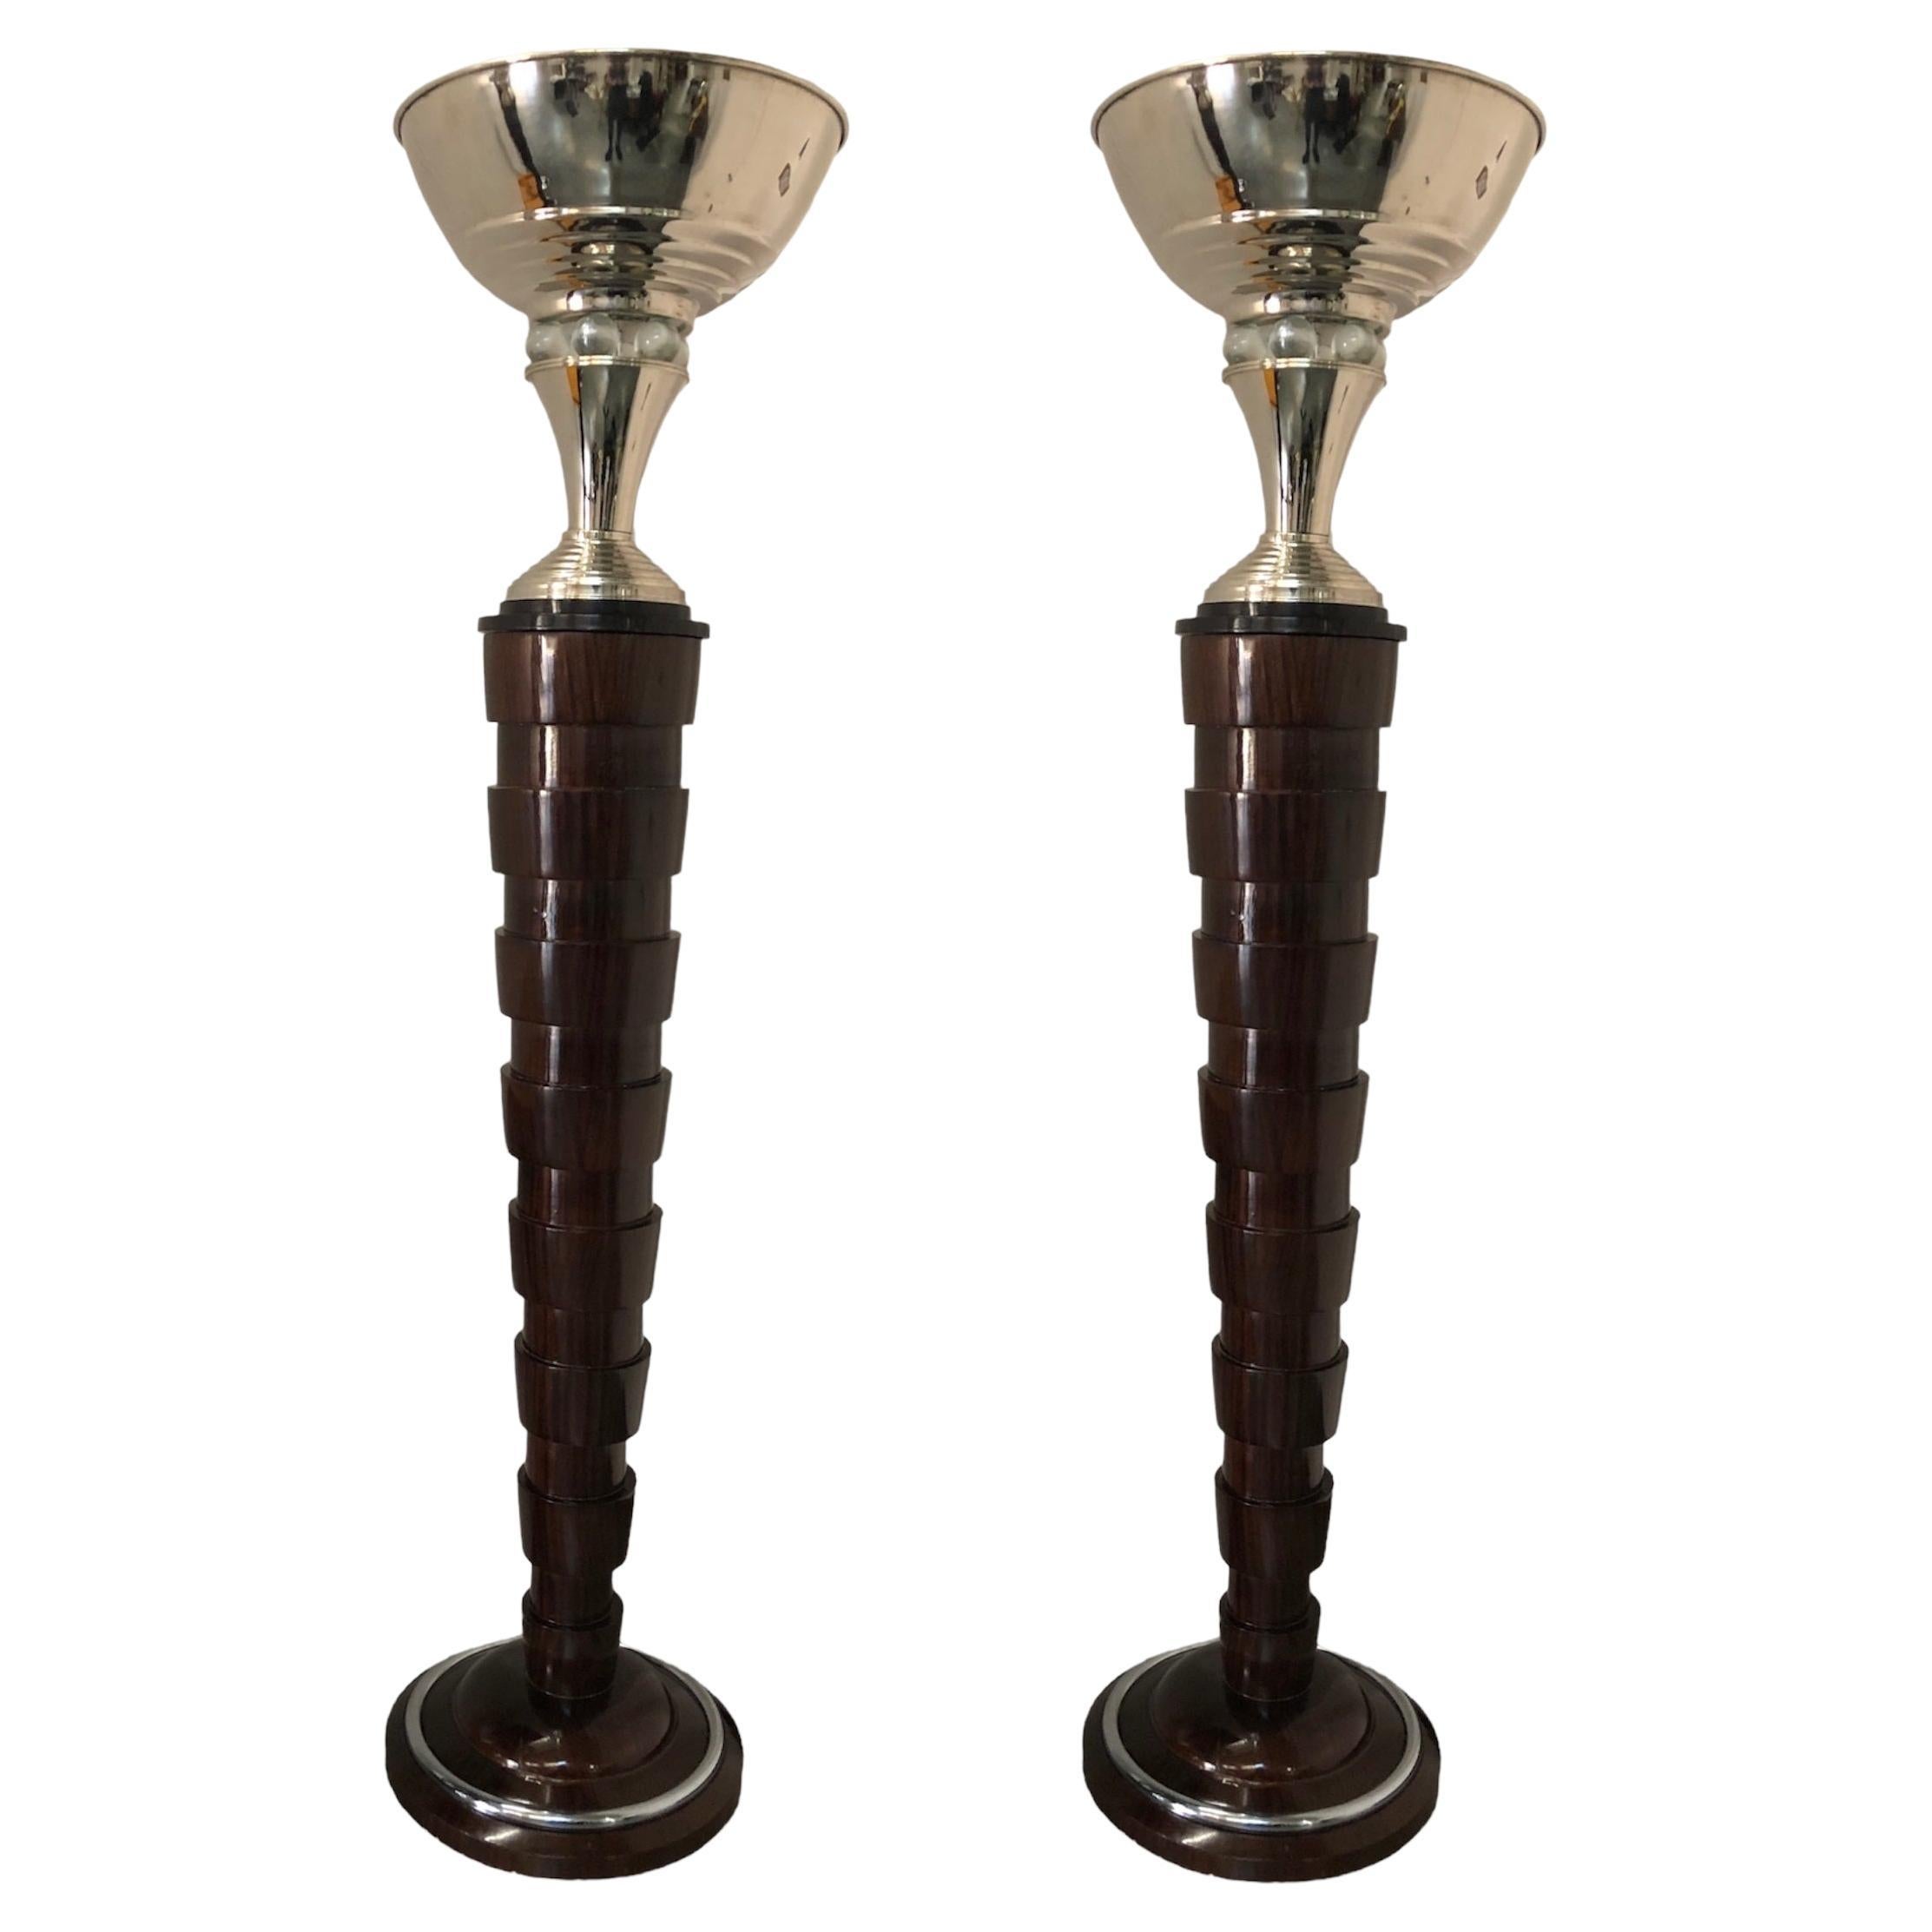 Pair of Art Deco Floor Lamps, France, Materials: Wood and Chrome, 1930 For Sale